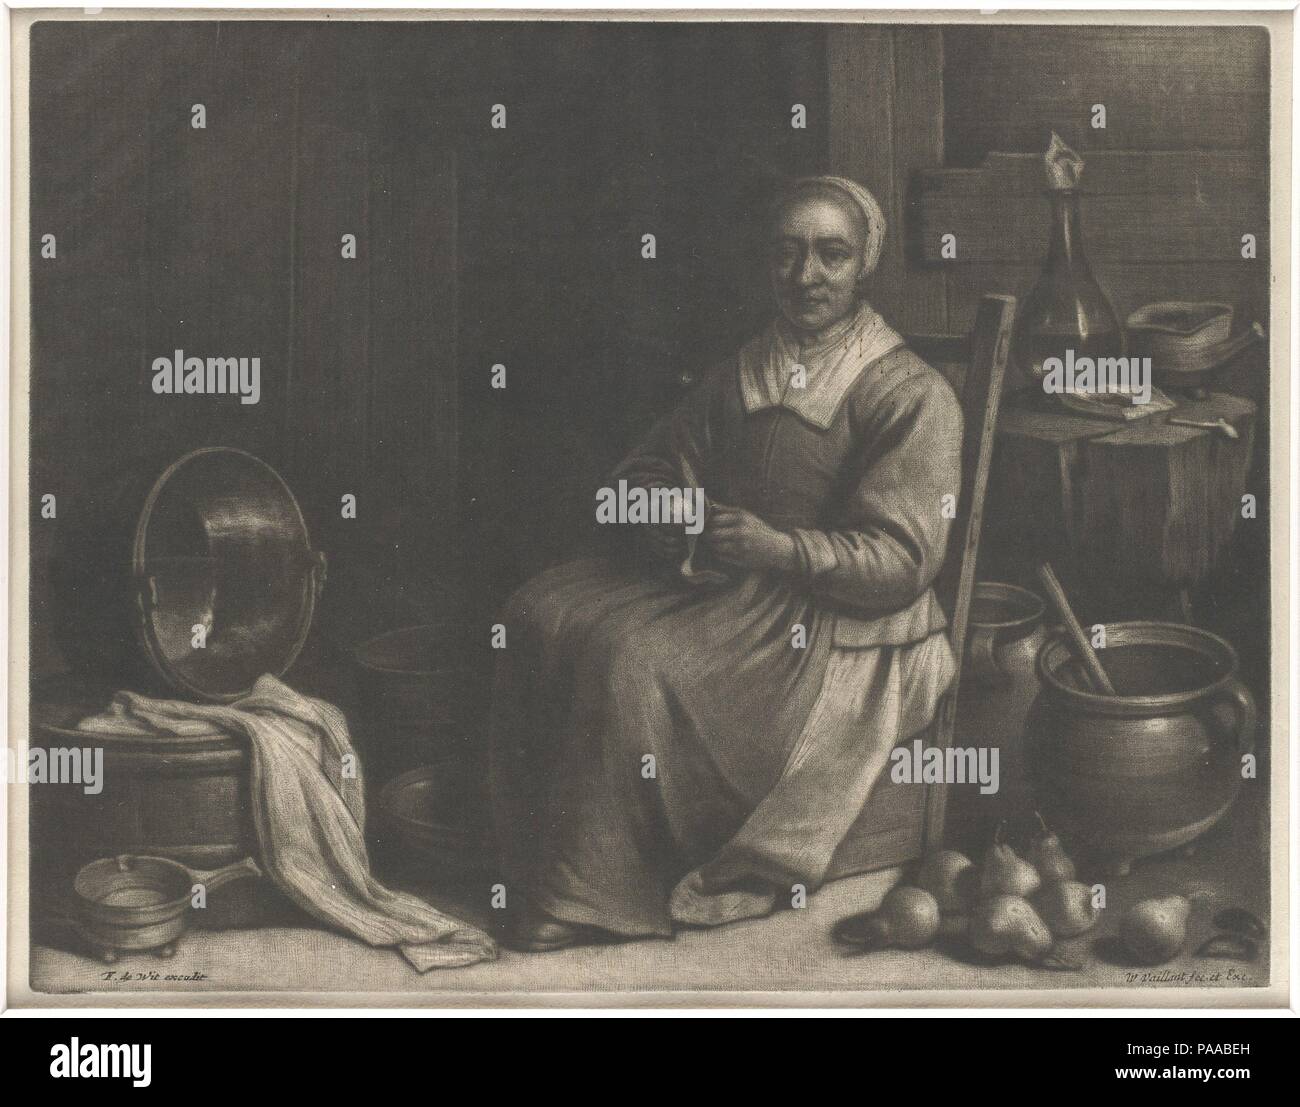 A Woman Peeling Pears. Artist: Wallerant Vaillant (Dutch, Lille 1623-1677 Amsterdam). Dimensions: Sheet: 9 3/4 x 12 1/16 in. (24.8 x 30.7 cm). Date: mid-17th century.  Vaillant learned the mezzotint technique from Prince Rupert of the Rhine, whom he met and assisted during a visit to Frankfurt am Main in 1658. Active in Amsterdam and Paris, Vaillant became the first professional mezzotint-engraver, whose works achieved success throughout Europe. Here, he presents a domestic scene of his own design, showing a woman (presumably a servant) peeling fruit. As this richly toned plate reveals, Vailla Stock Photo